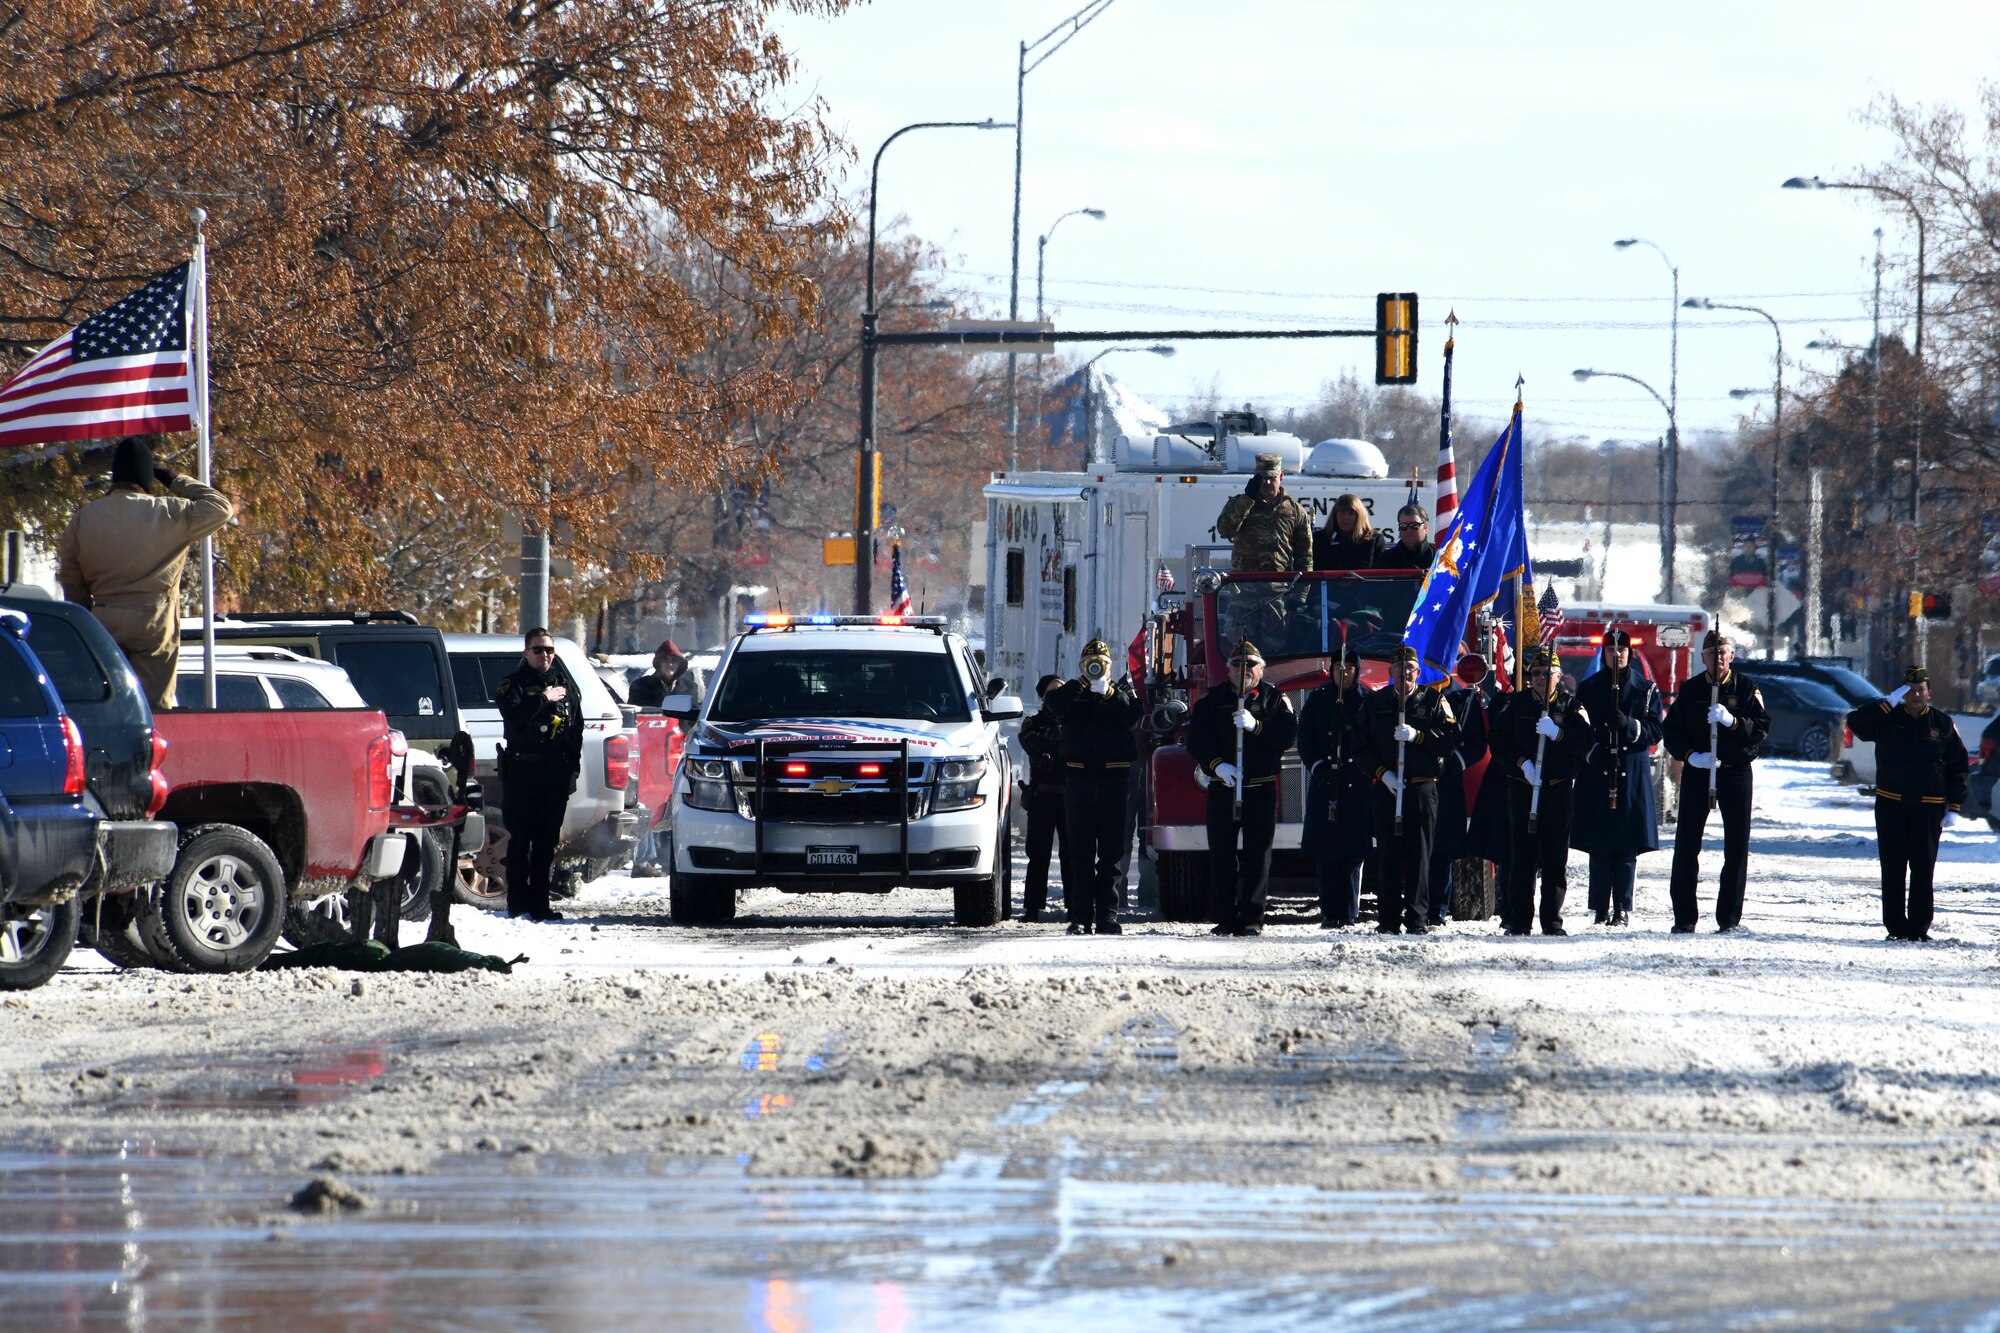 The 2019 Veteran’s Day Parade begins on Main Street in Rapid City, S.D., Nov. 11, 2019. The Ellsworth Air Force Base Honor Guard presented the colors during the playing of Taps, while the 28th Bomb Wing commander and veterans saluted the flag. (U.S. Air Force photo by Staff Sgt. Hailey Staker)